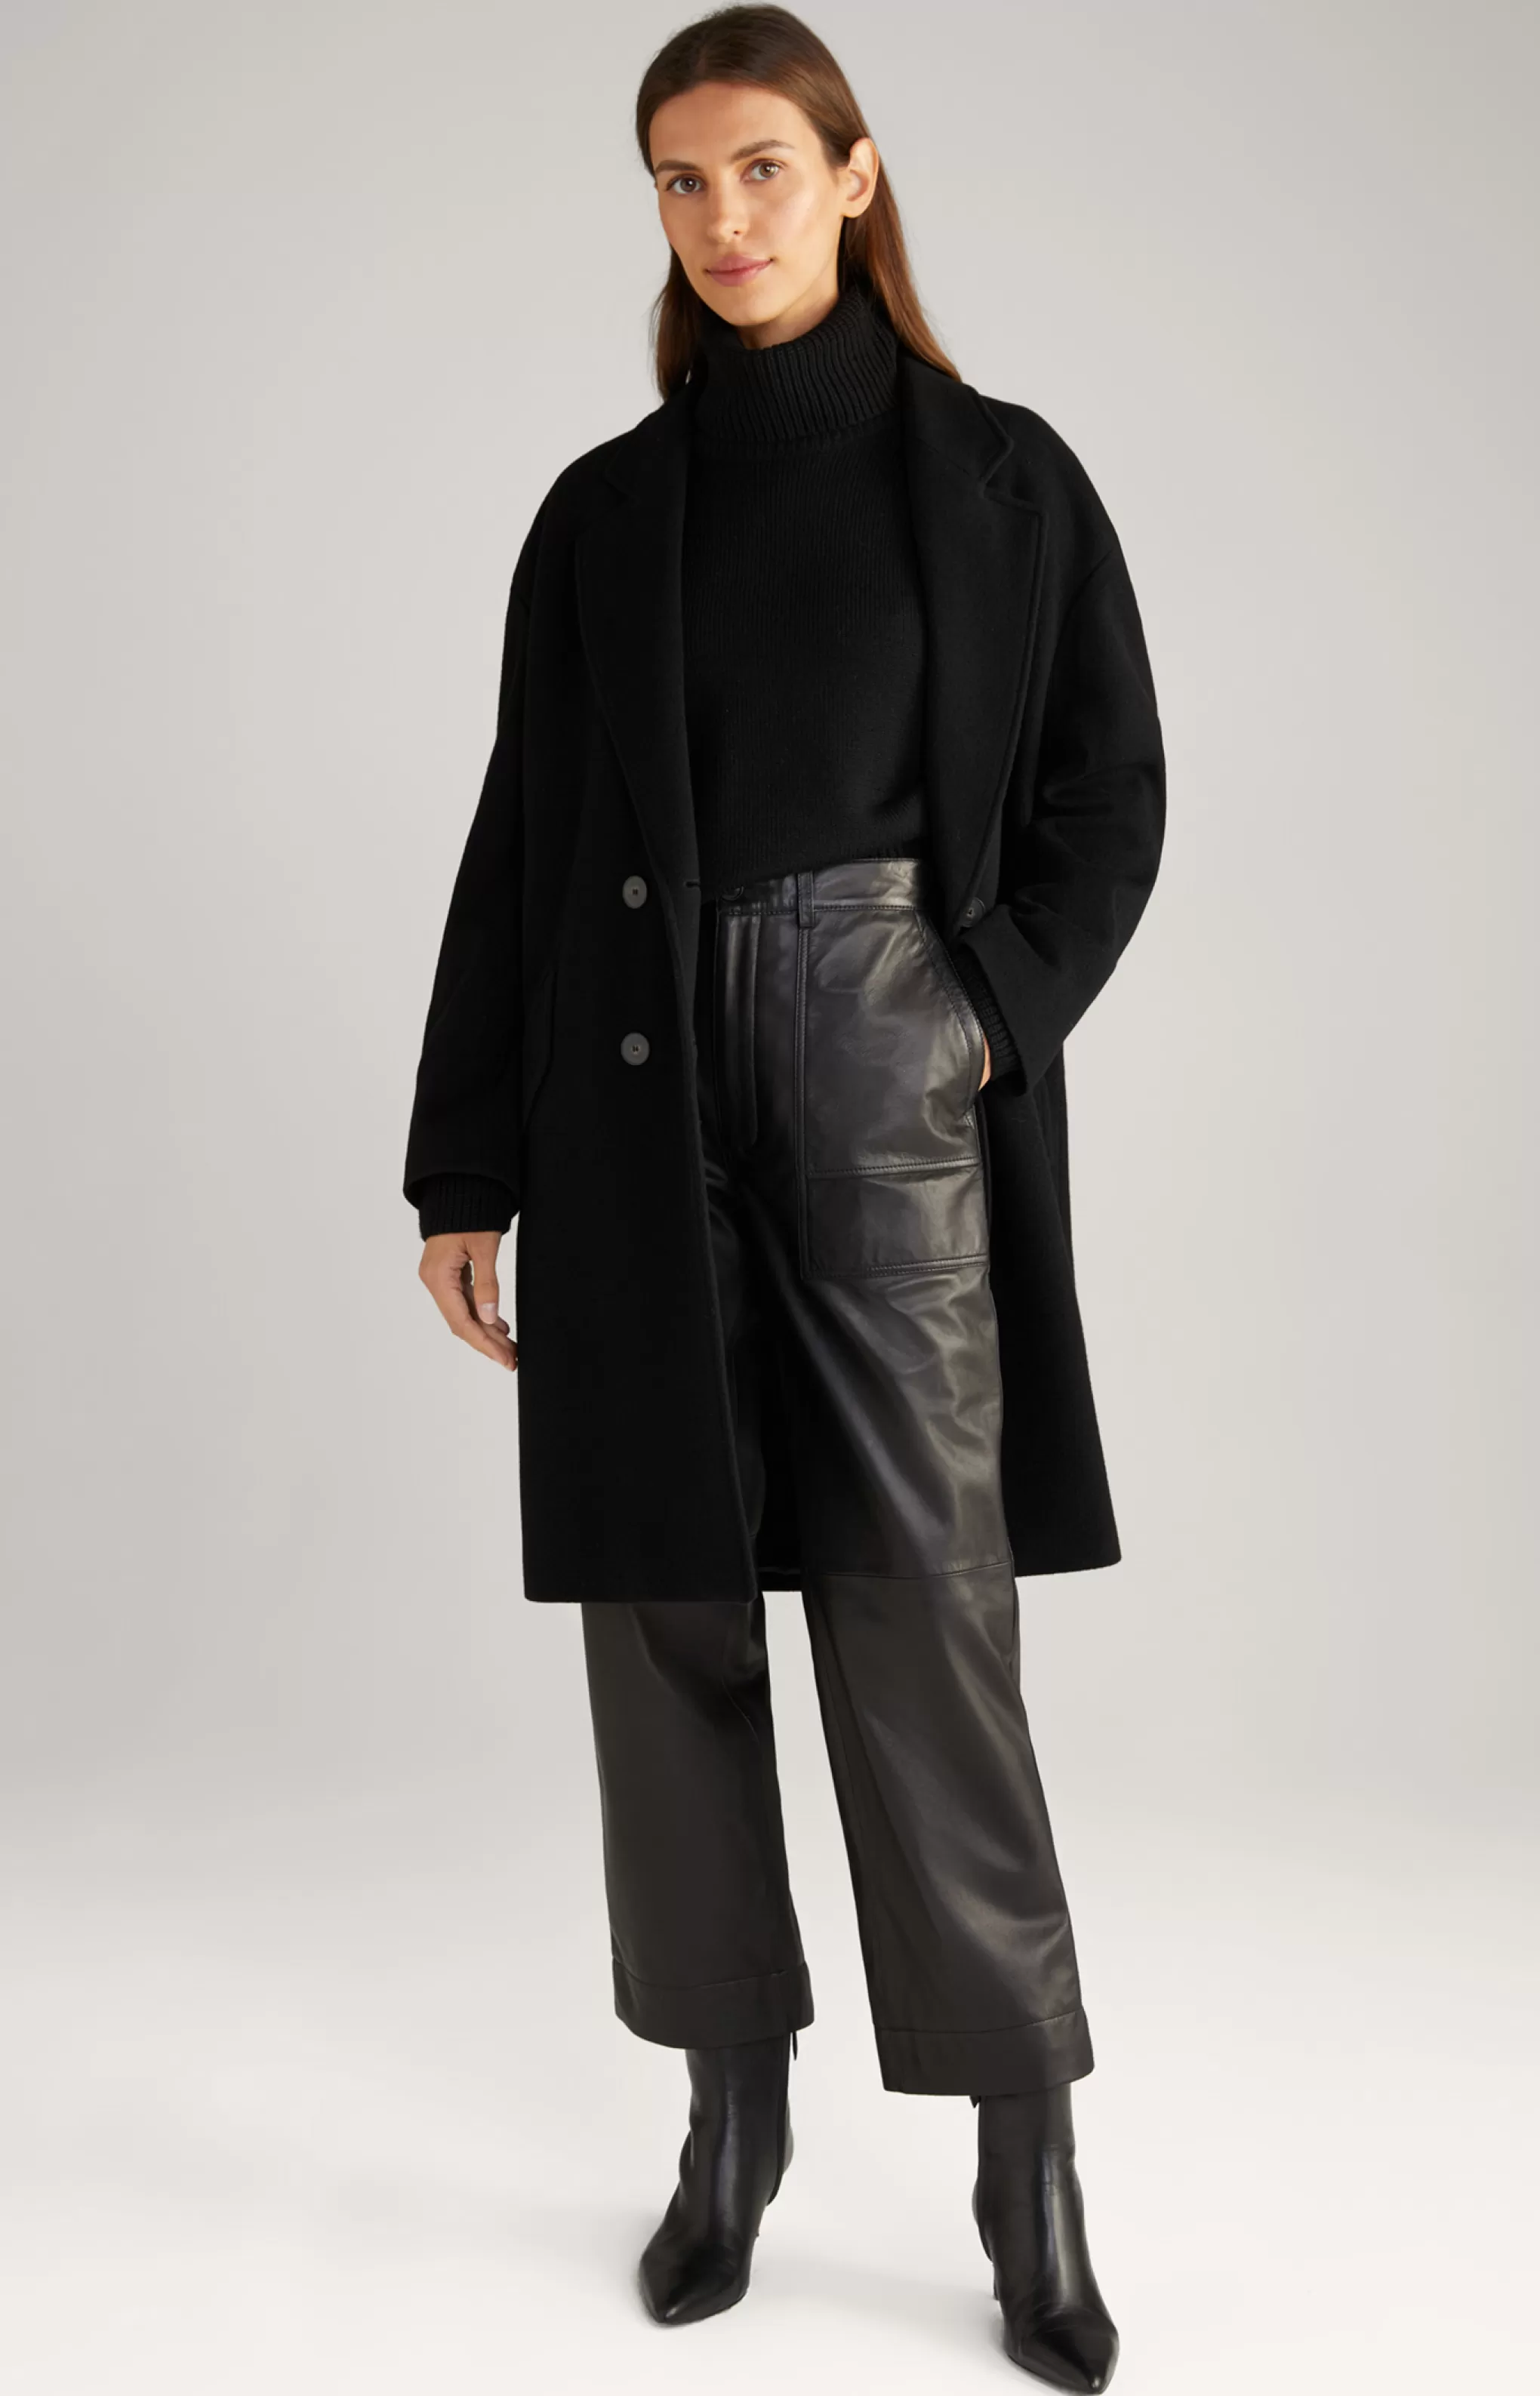 Leather | Trousers | Clothing*JOOP Leather | Trousers | Clothing Leather Trousers in